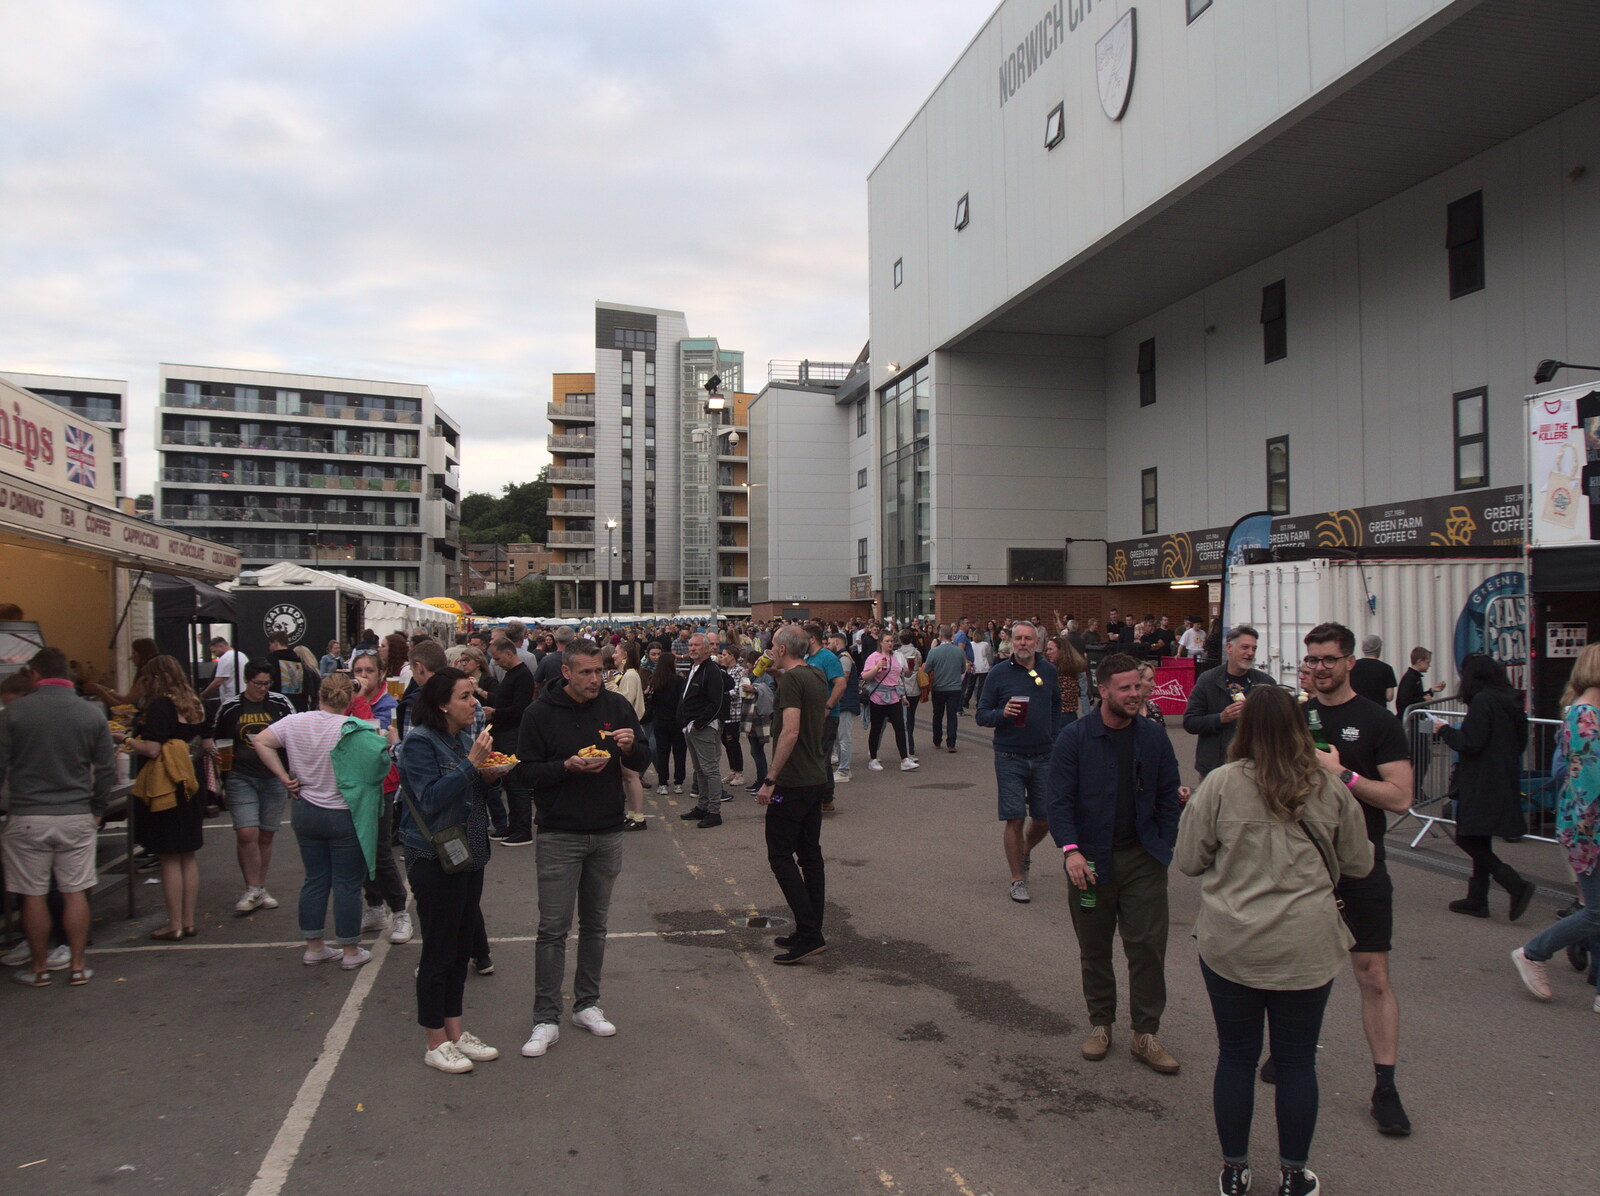 The Killers at Carrow Road, Norwich, Norfolk - 9th June 2022: The grim 'food village' round the back